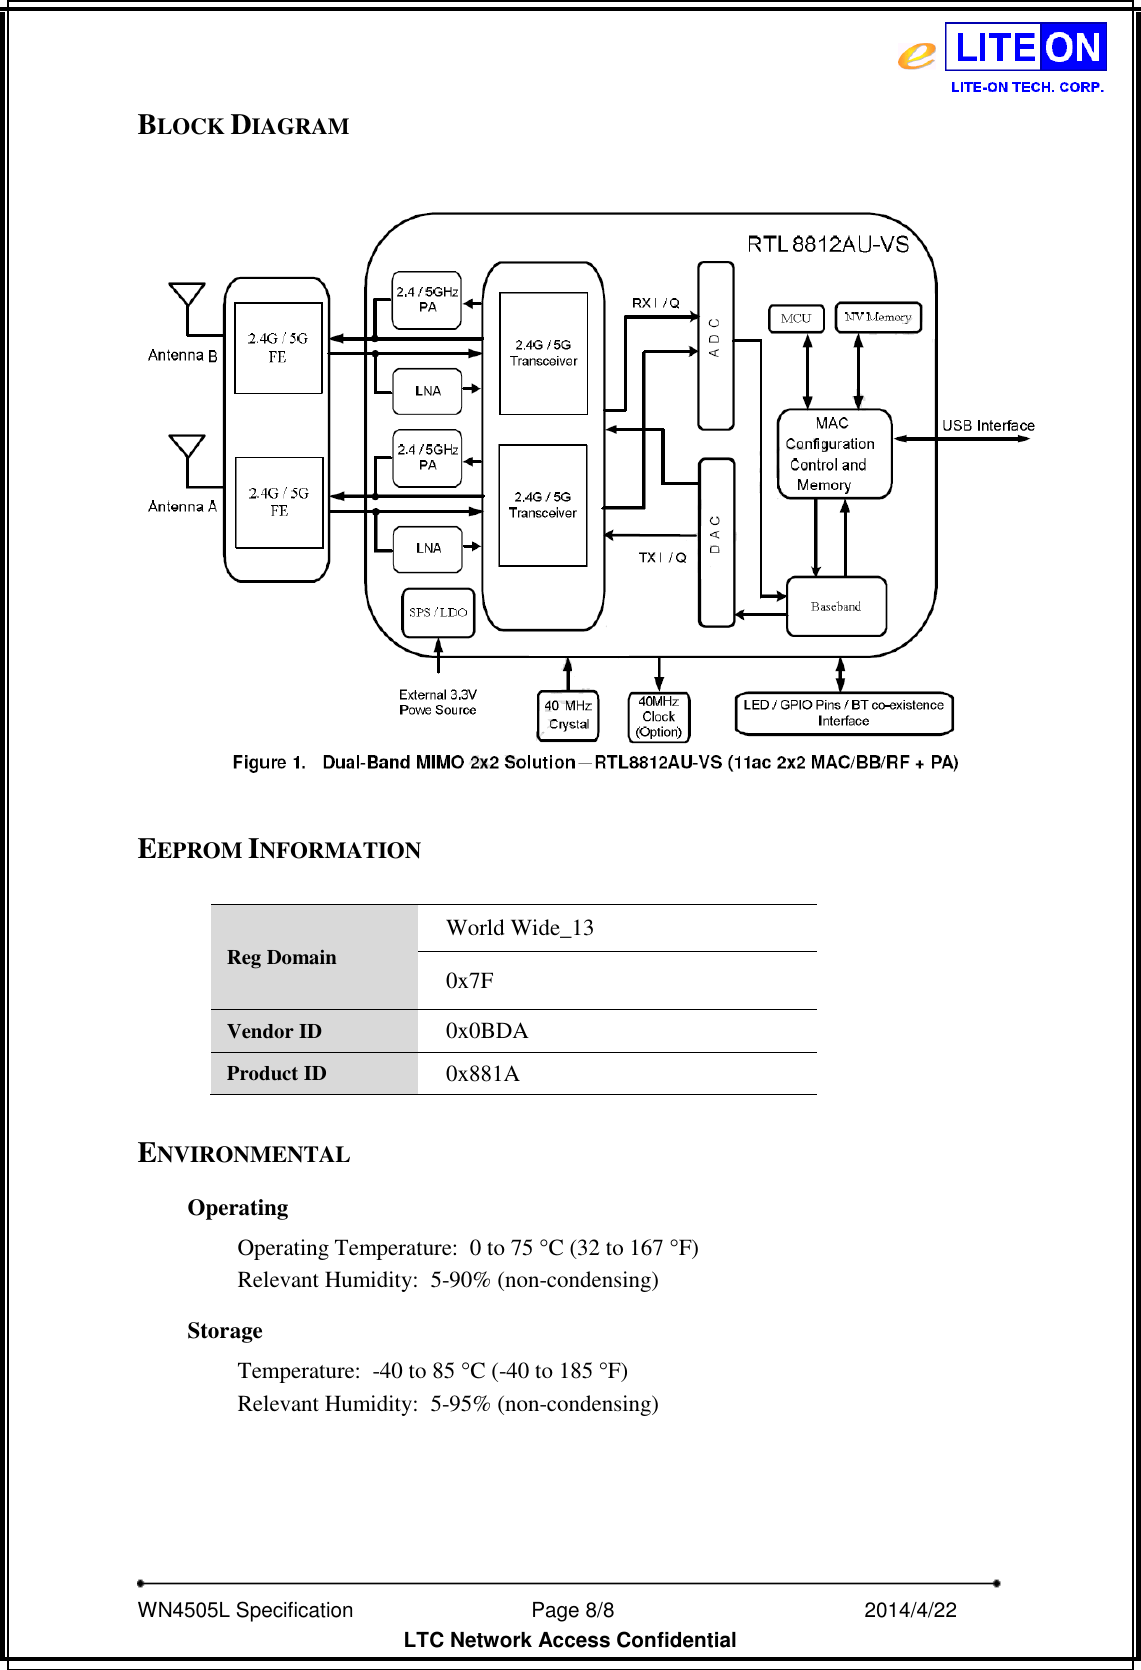   WN4505L Specification                              Page 8/8                                                2014/4/22   LTC Network Access Confidential BLOCK DIAGRAM    EEPROM INFORMATION  Reg Domain World Wide_13 0x7F Vendor ID 0x0BDA Product ID 0x881A  ENVIRONMENTAL Operating Operating Temperature:  0 to 75 C (32 to 167 F) Relevant Humidity:  5-90% (non-condensing) Storage Temperature:  -40 to 85 C (-40 to 185 F) Relevant Humidity:  5-95% (non-condensing)  